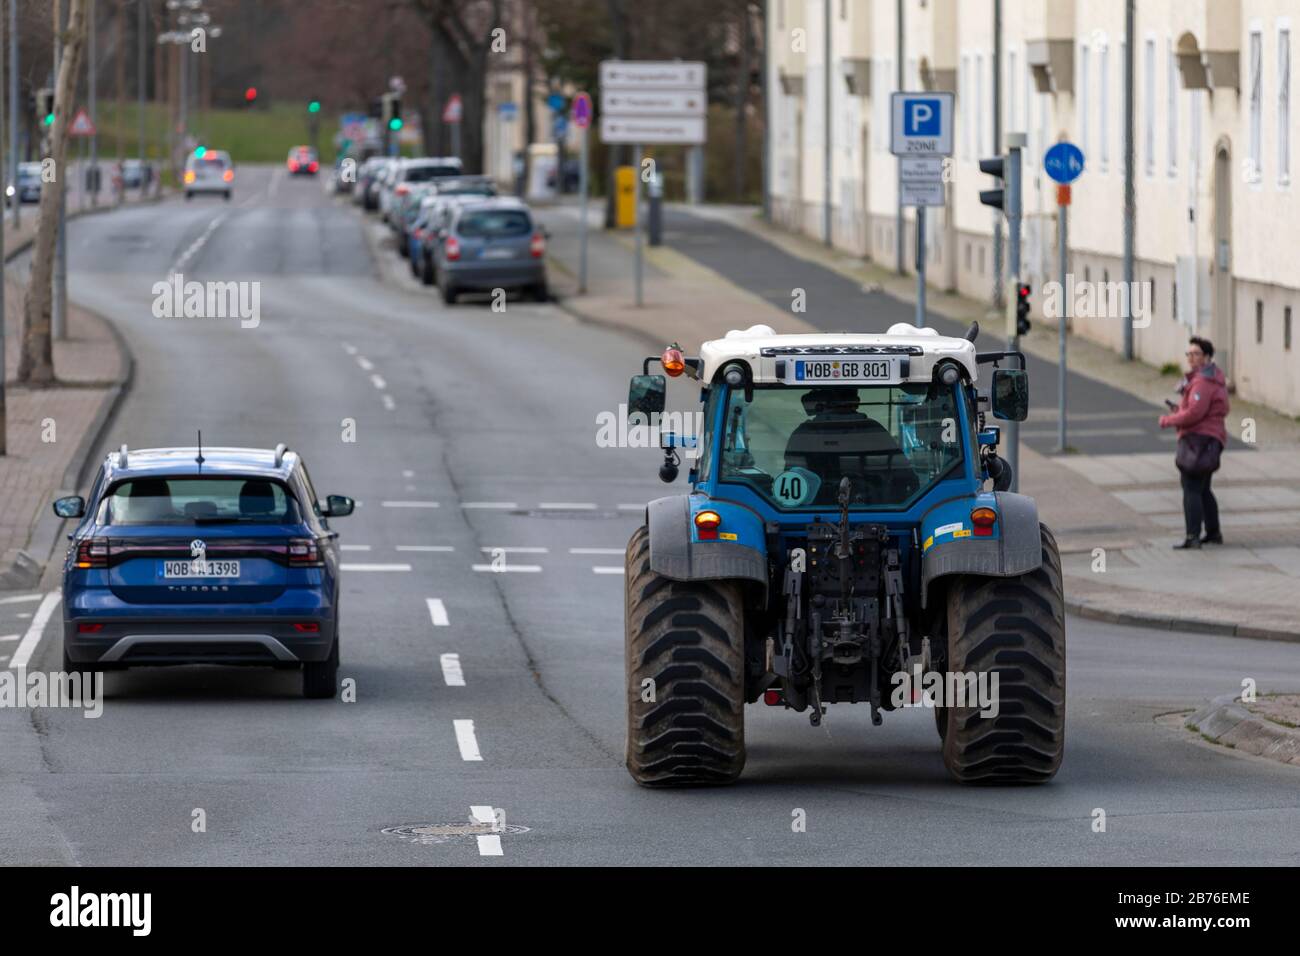 Tractors are part of urban traffic in Wolfsburg Germany. Volkswagen cars are more common because car plant is located in town. Stock Photo